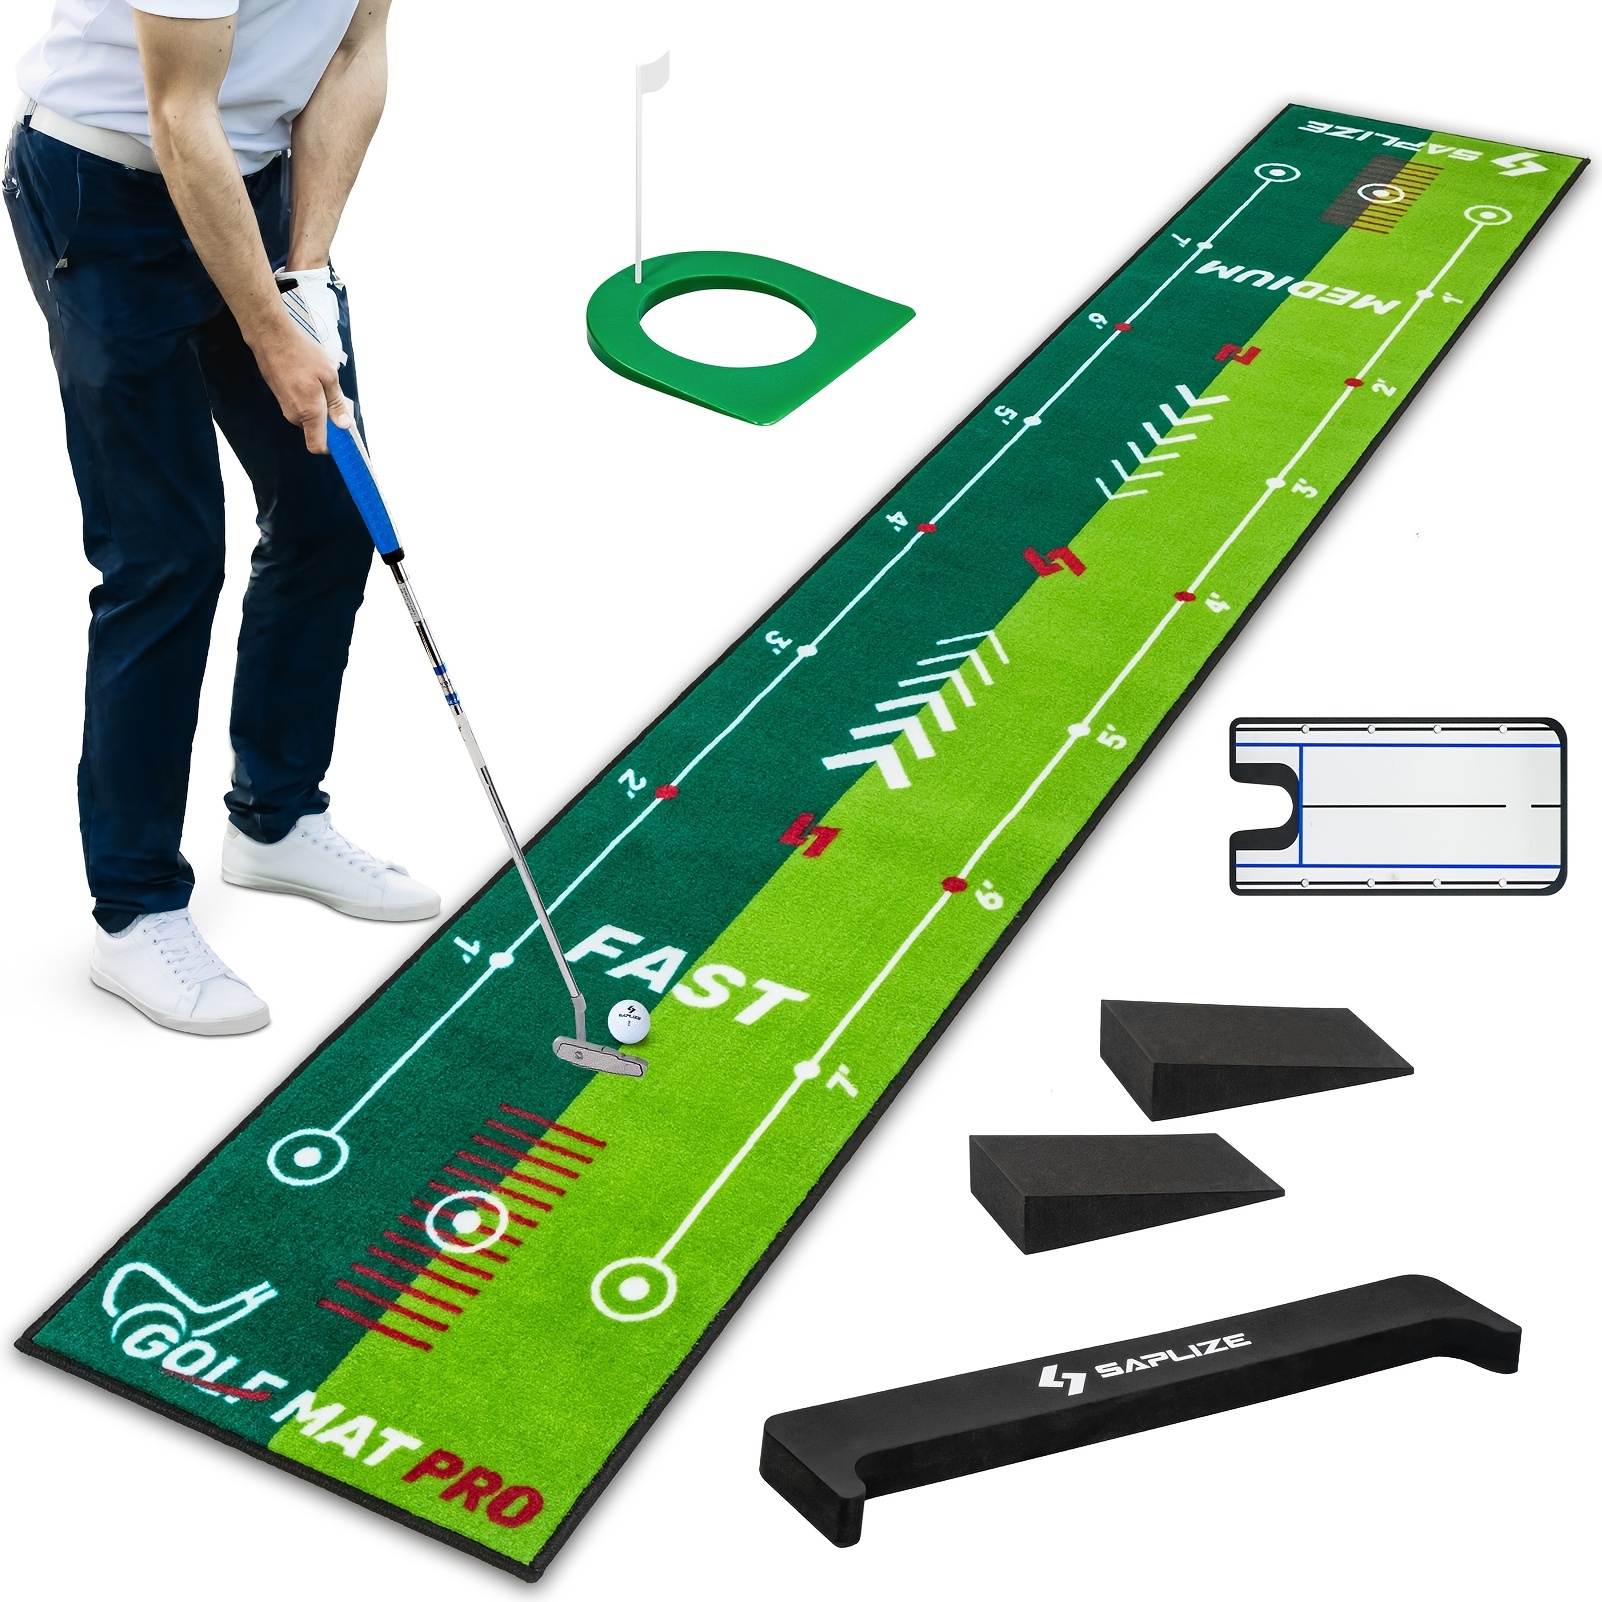 two speed golf putting practice mat with putting alignment mirror putting training aid mat anti slip golf putting green for indoor outdoor details 0